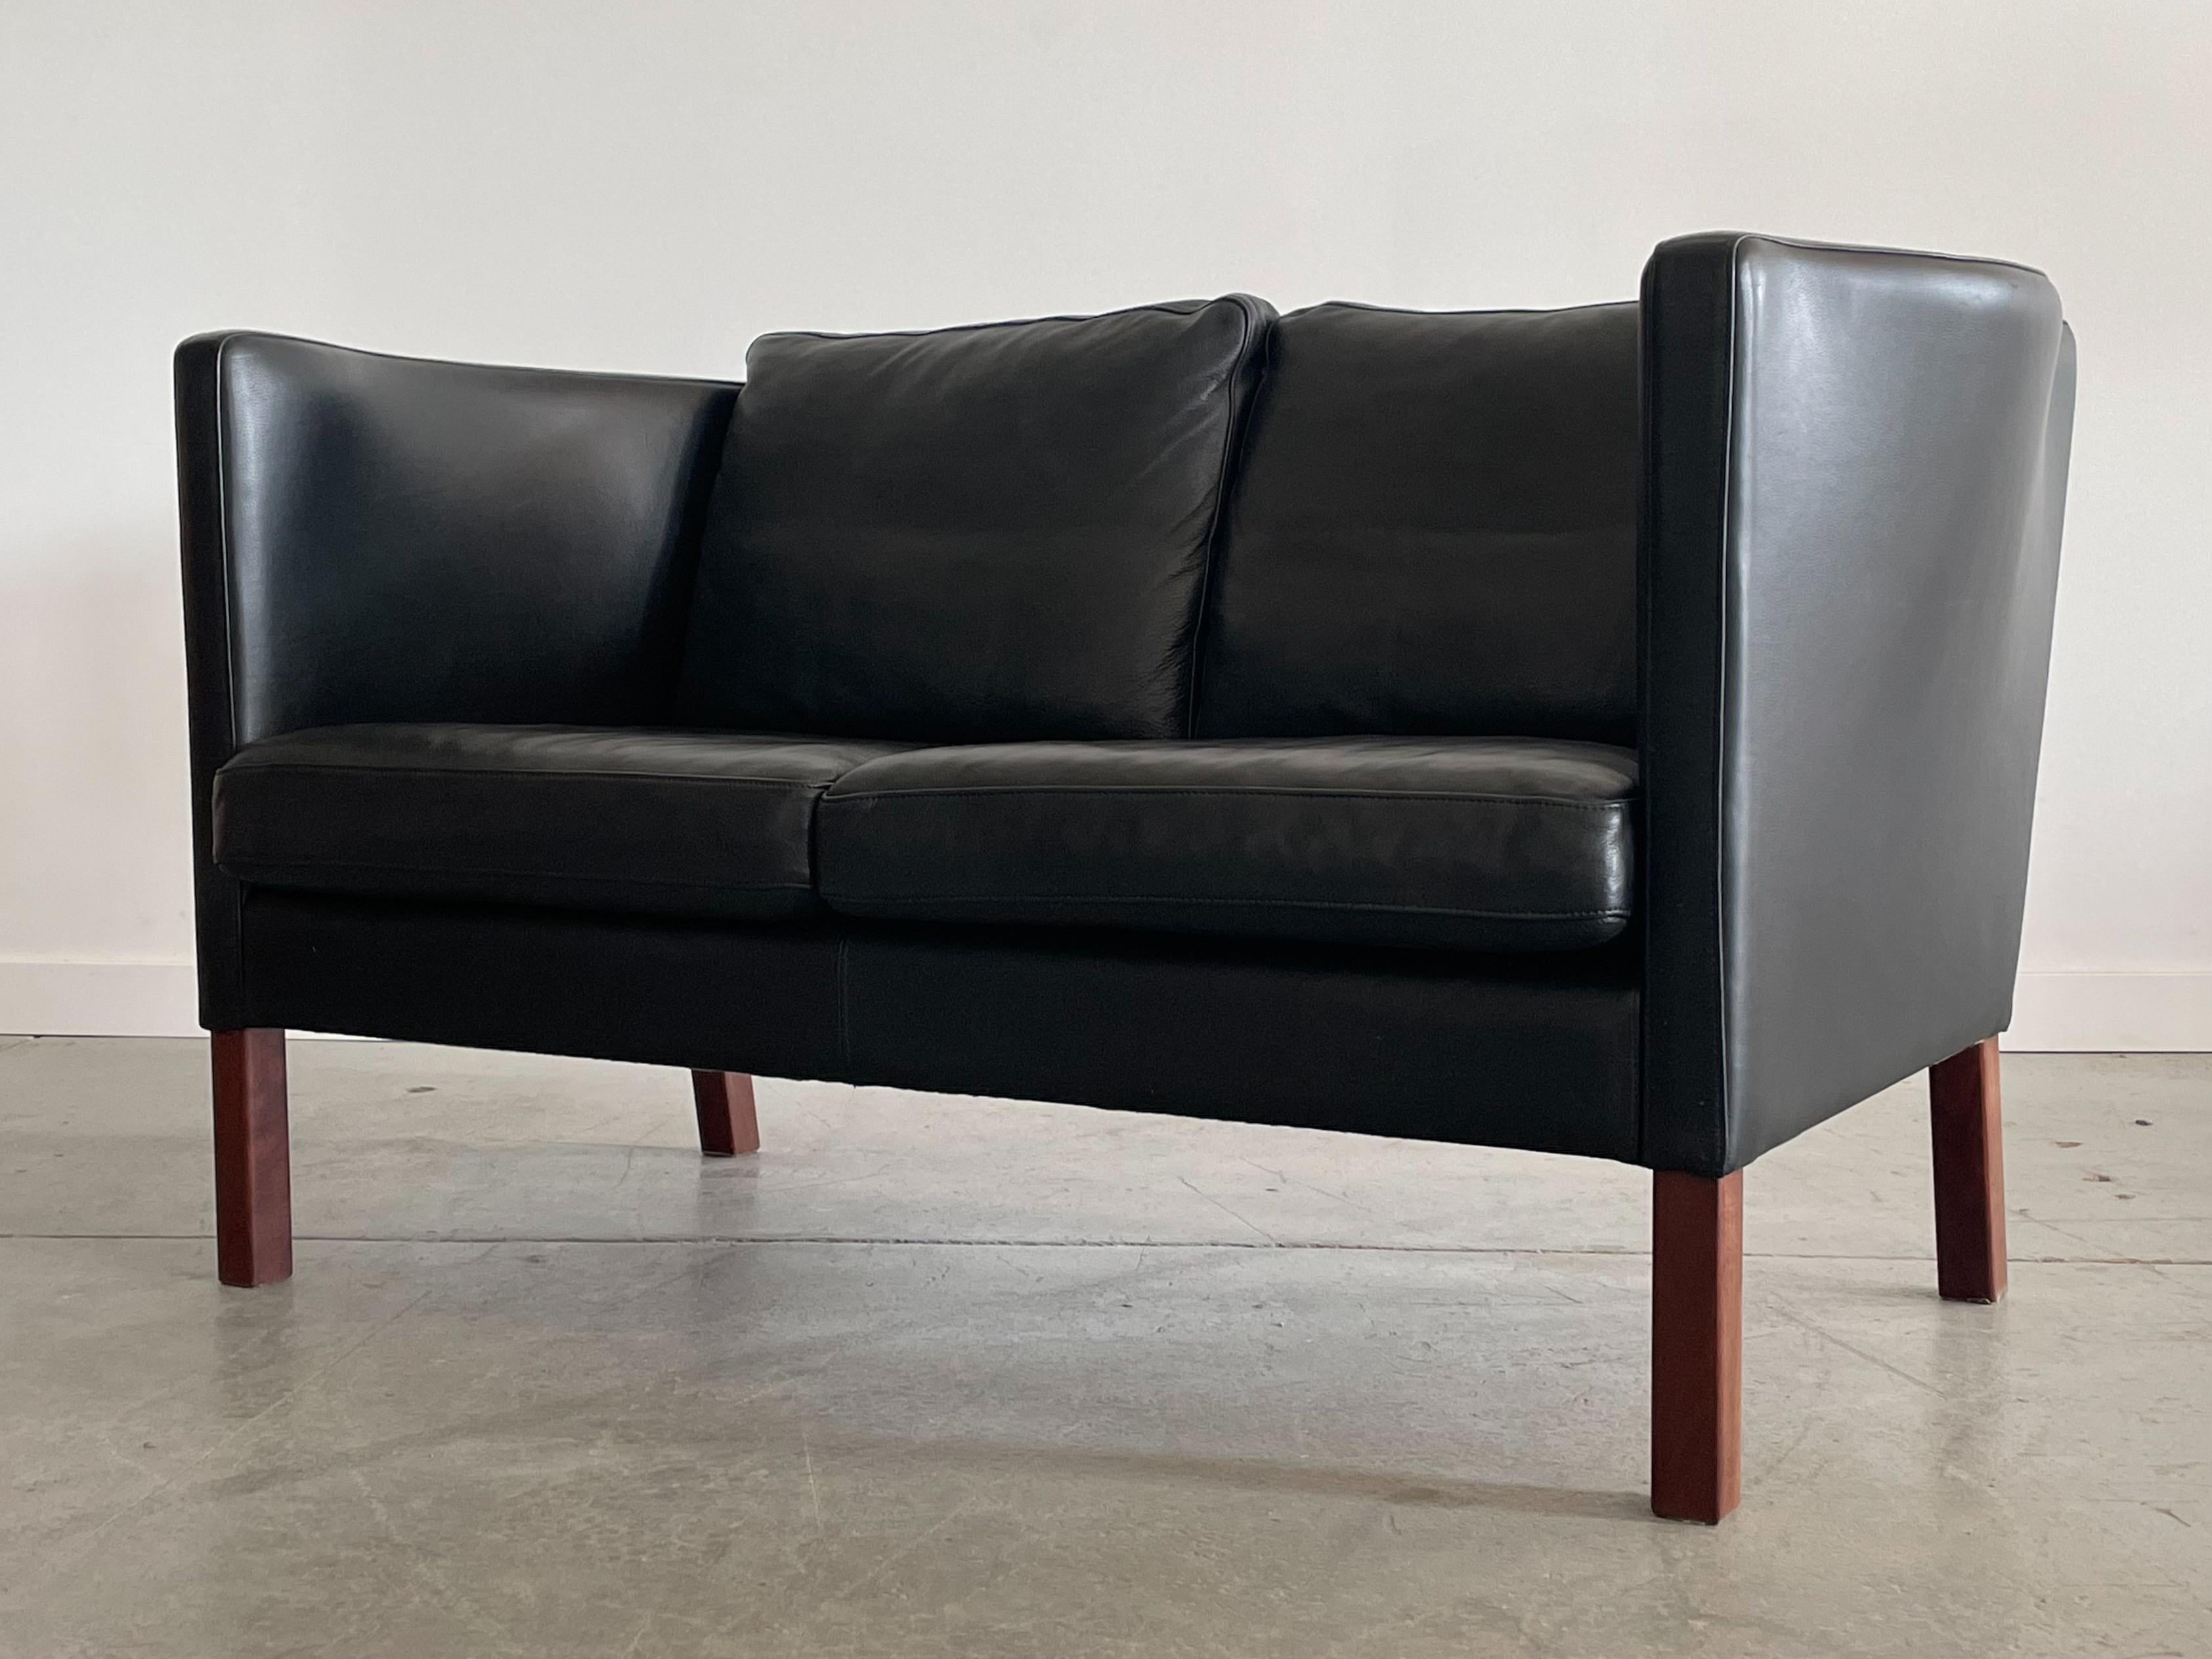 Beautiful Model AV59 two-seater sofa designed by Arne Vodder for Nielaus, Denmark. This piece features a slim profile typical of Danish designs with rosewood stained beech legs. Unique contoured side panels offer superb comfort when lounging. This